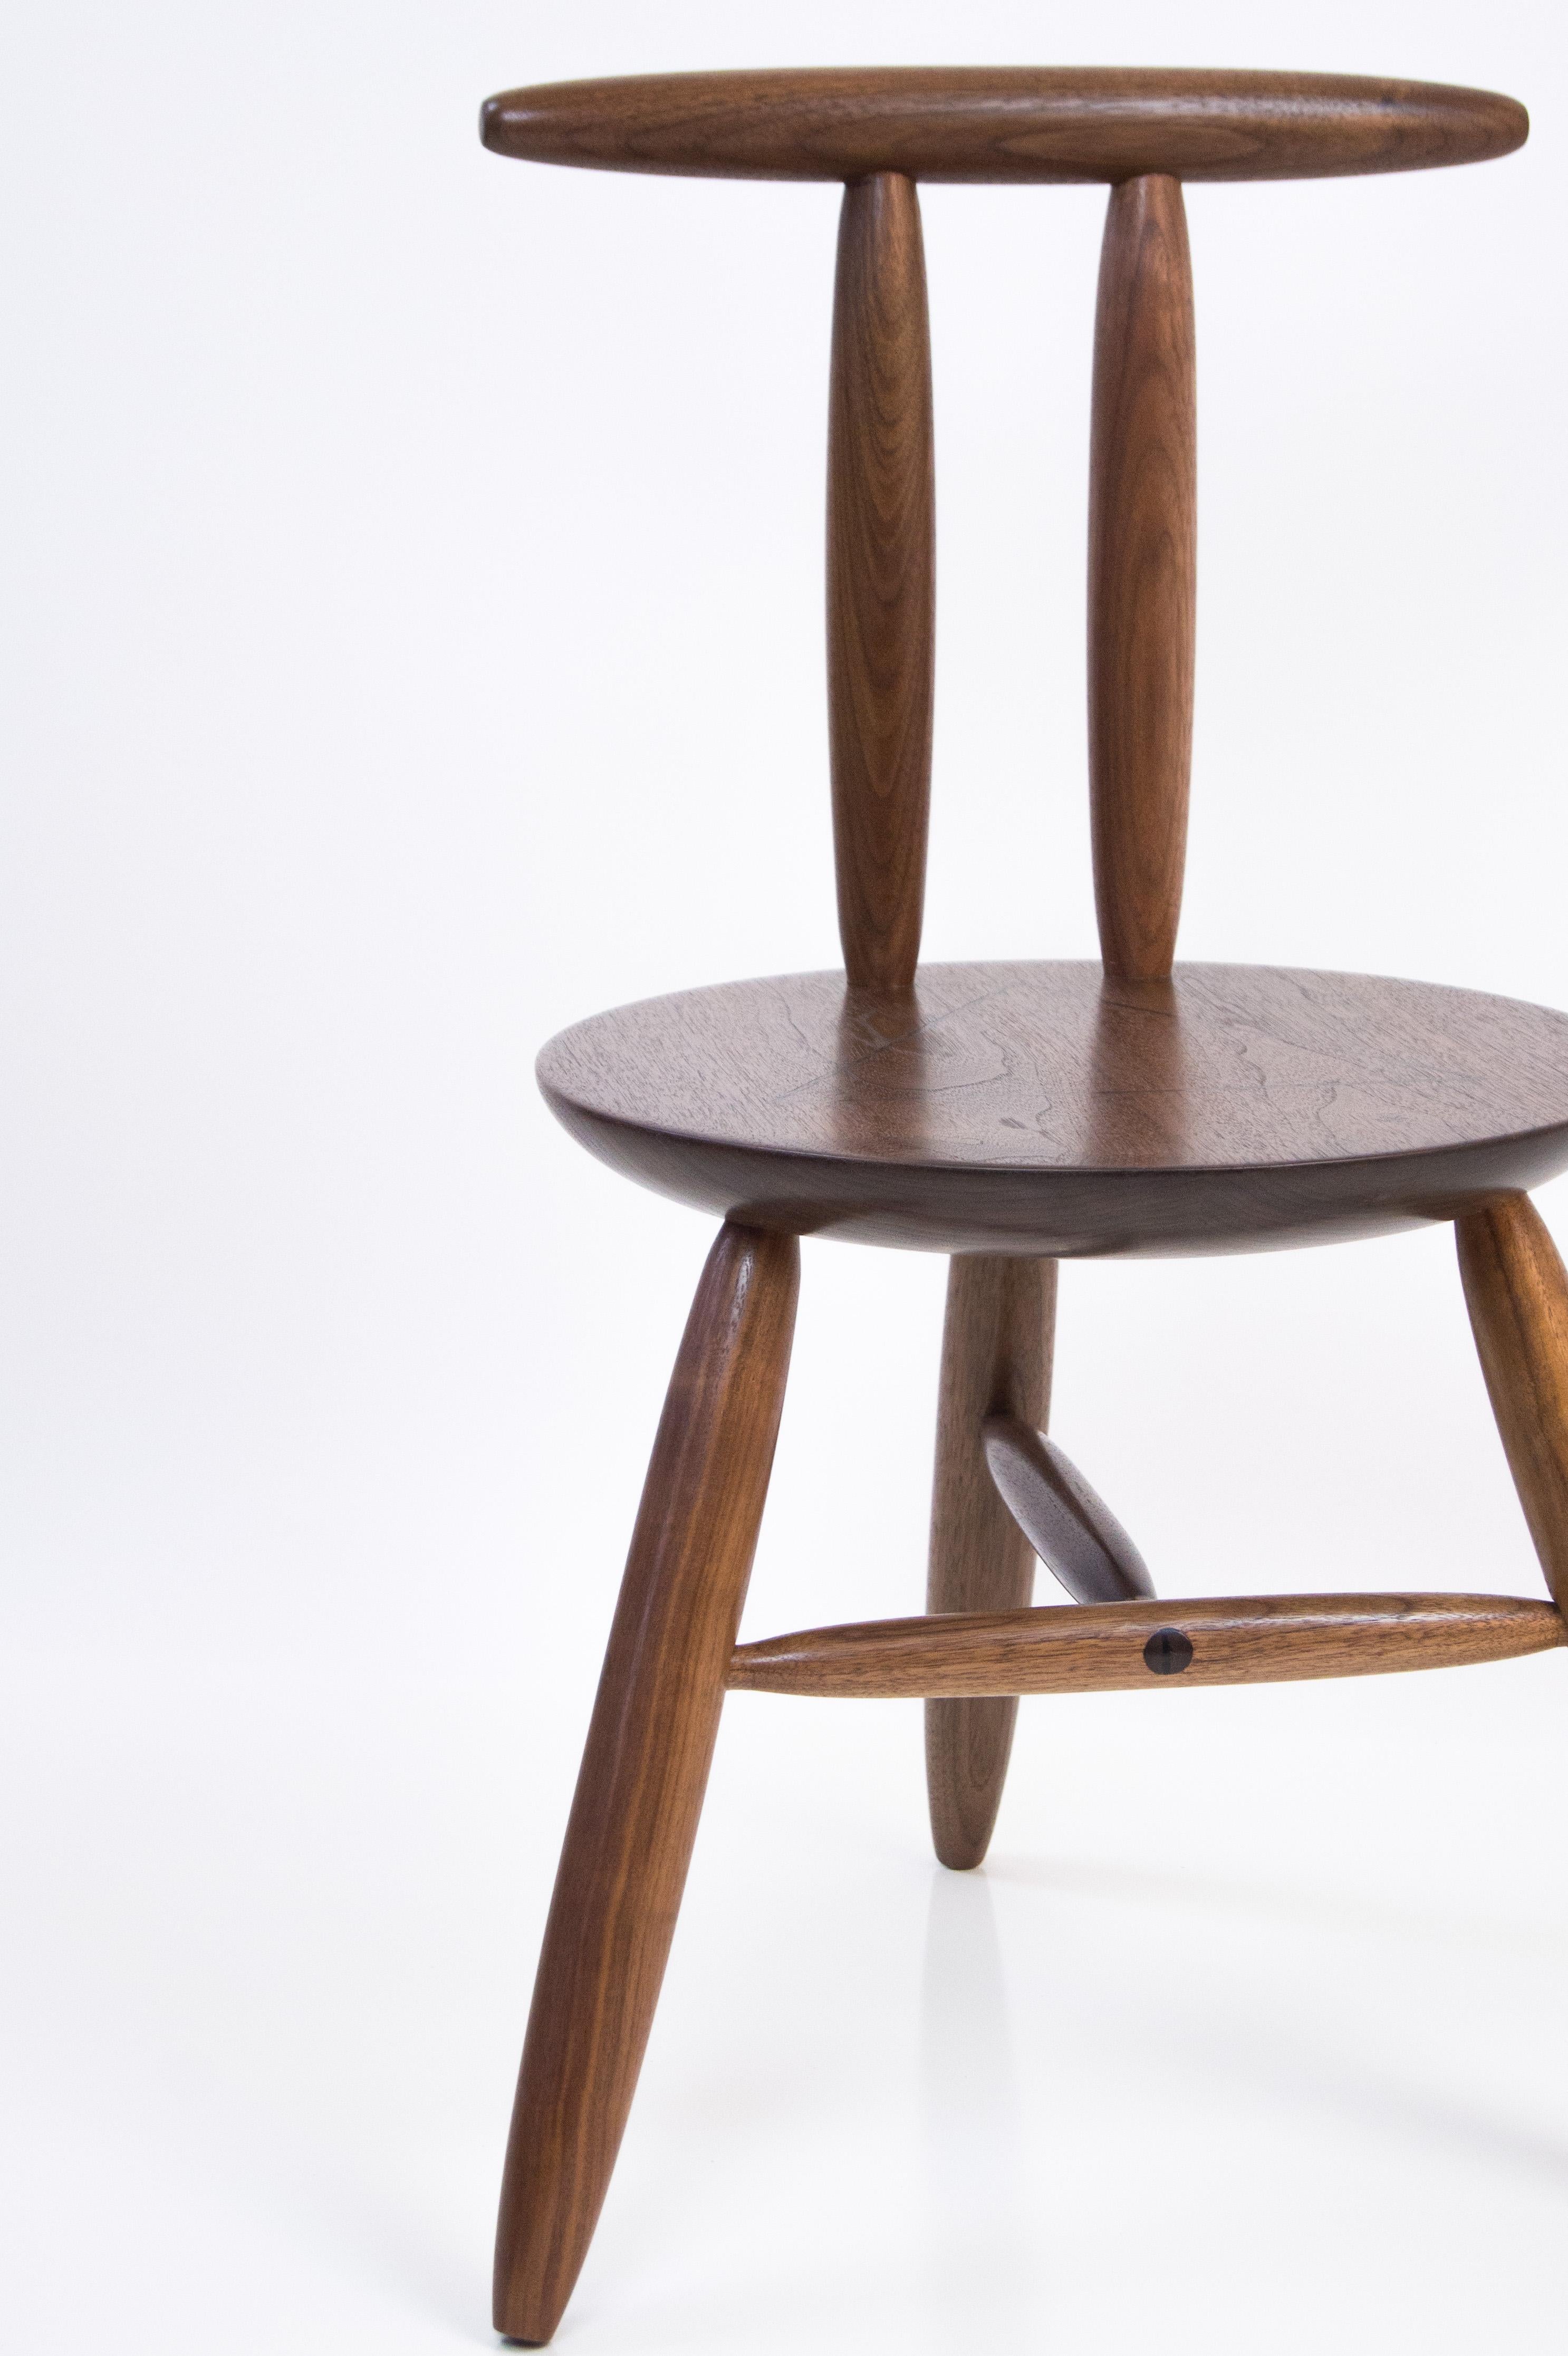 North American Chair with Exquisite Joinery in Walnut by Birnam Wood Studio For Sale